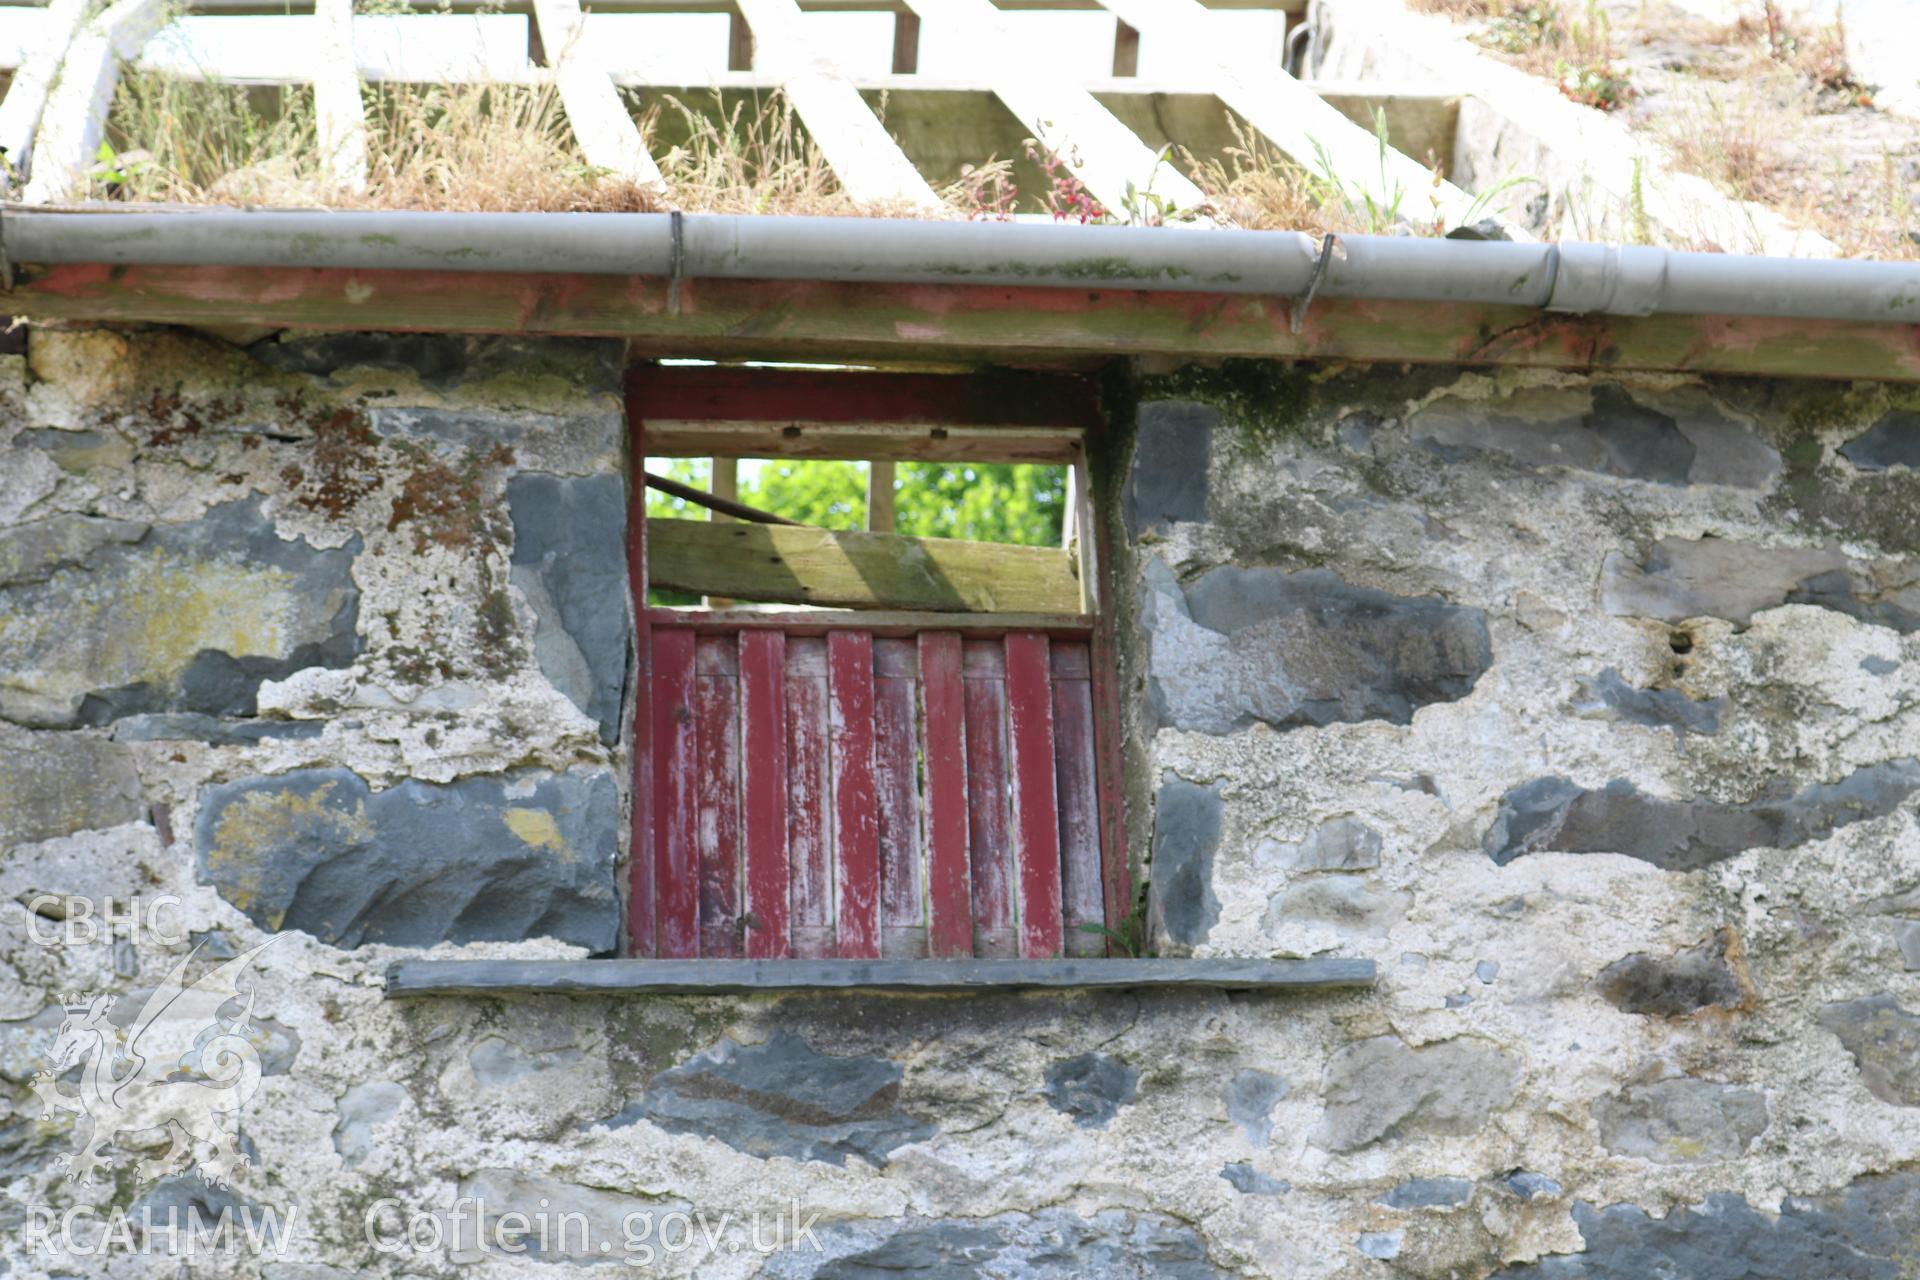 Photograph showing exterior view of 'granary' window, at Maes yr Hendre, taken by Dr Marian Gwyn, 6th July 2016. (Original Reference no. 0201)